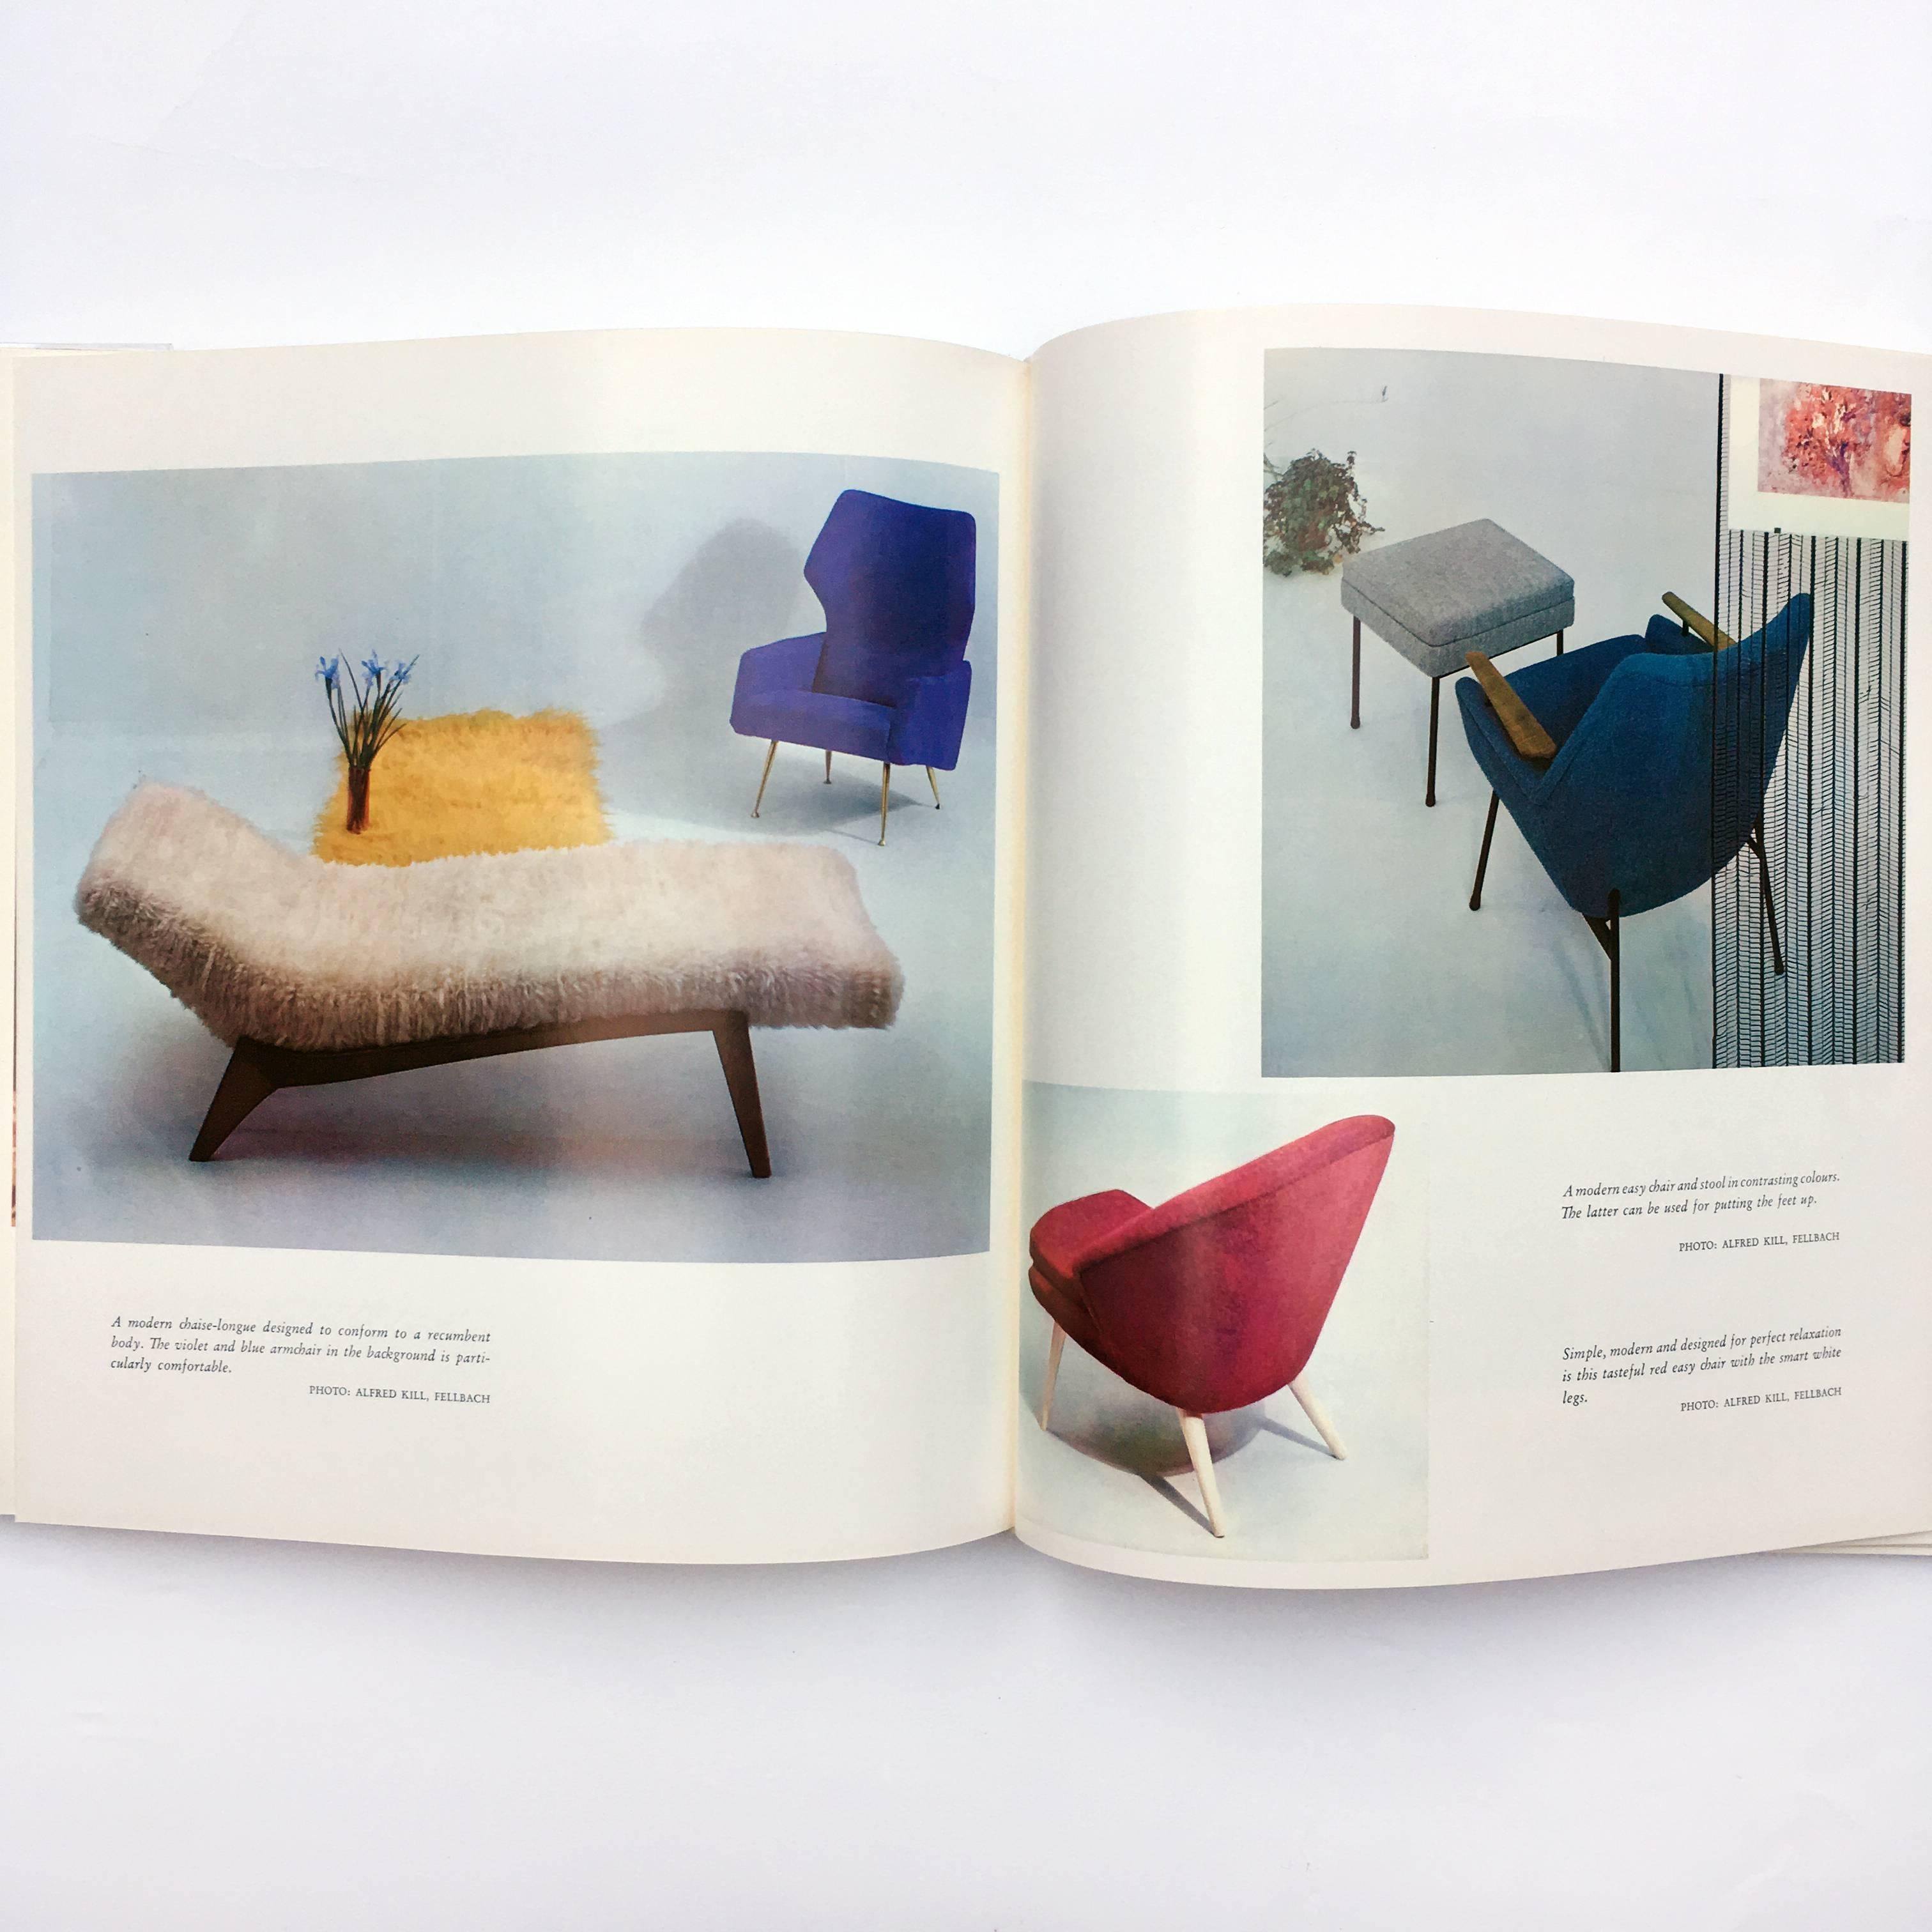 Interiors for Contemporary Living 1st Edition, 1960 In Fair Condition For Sale In London, GB